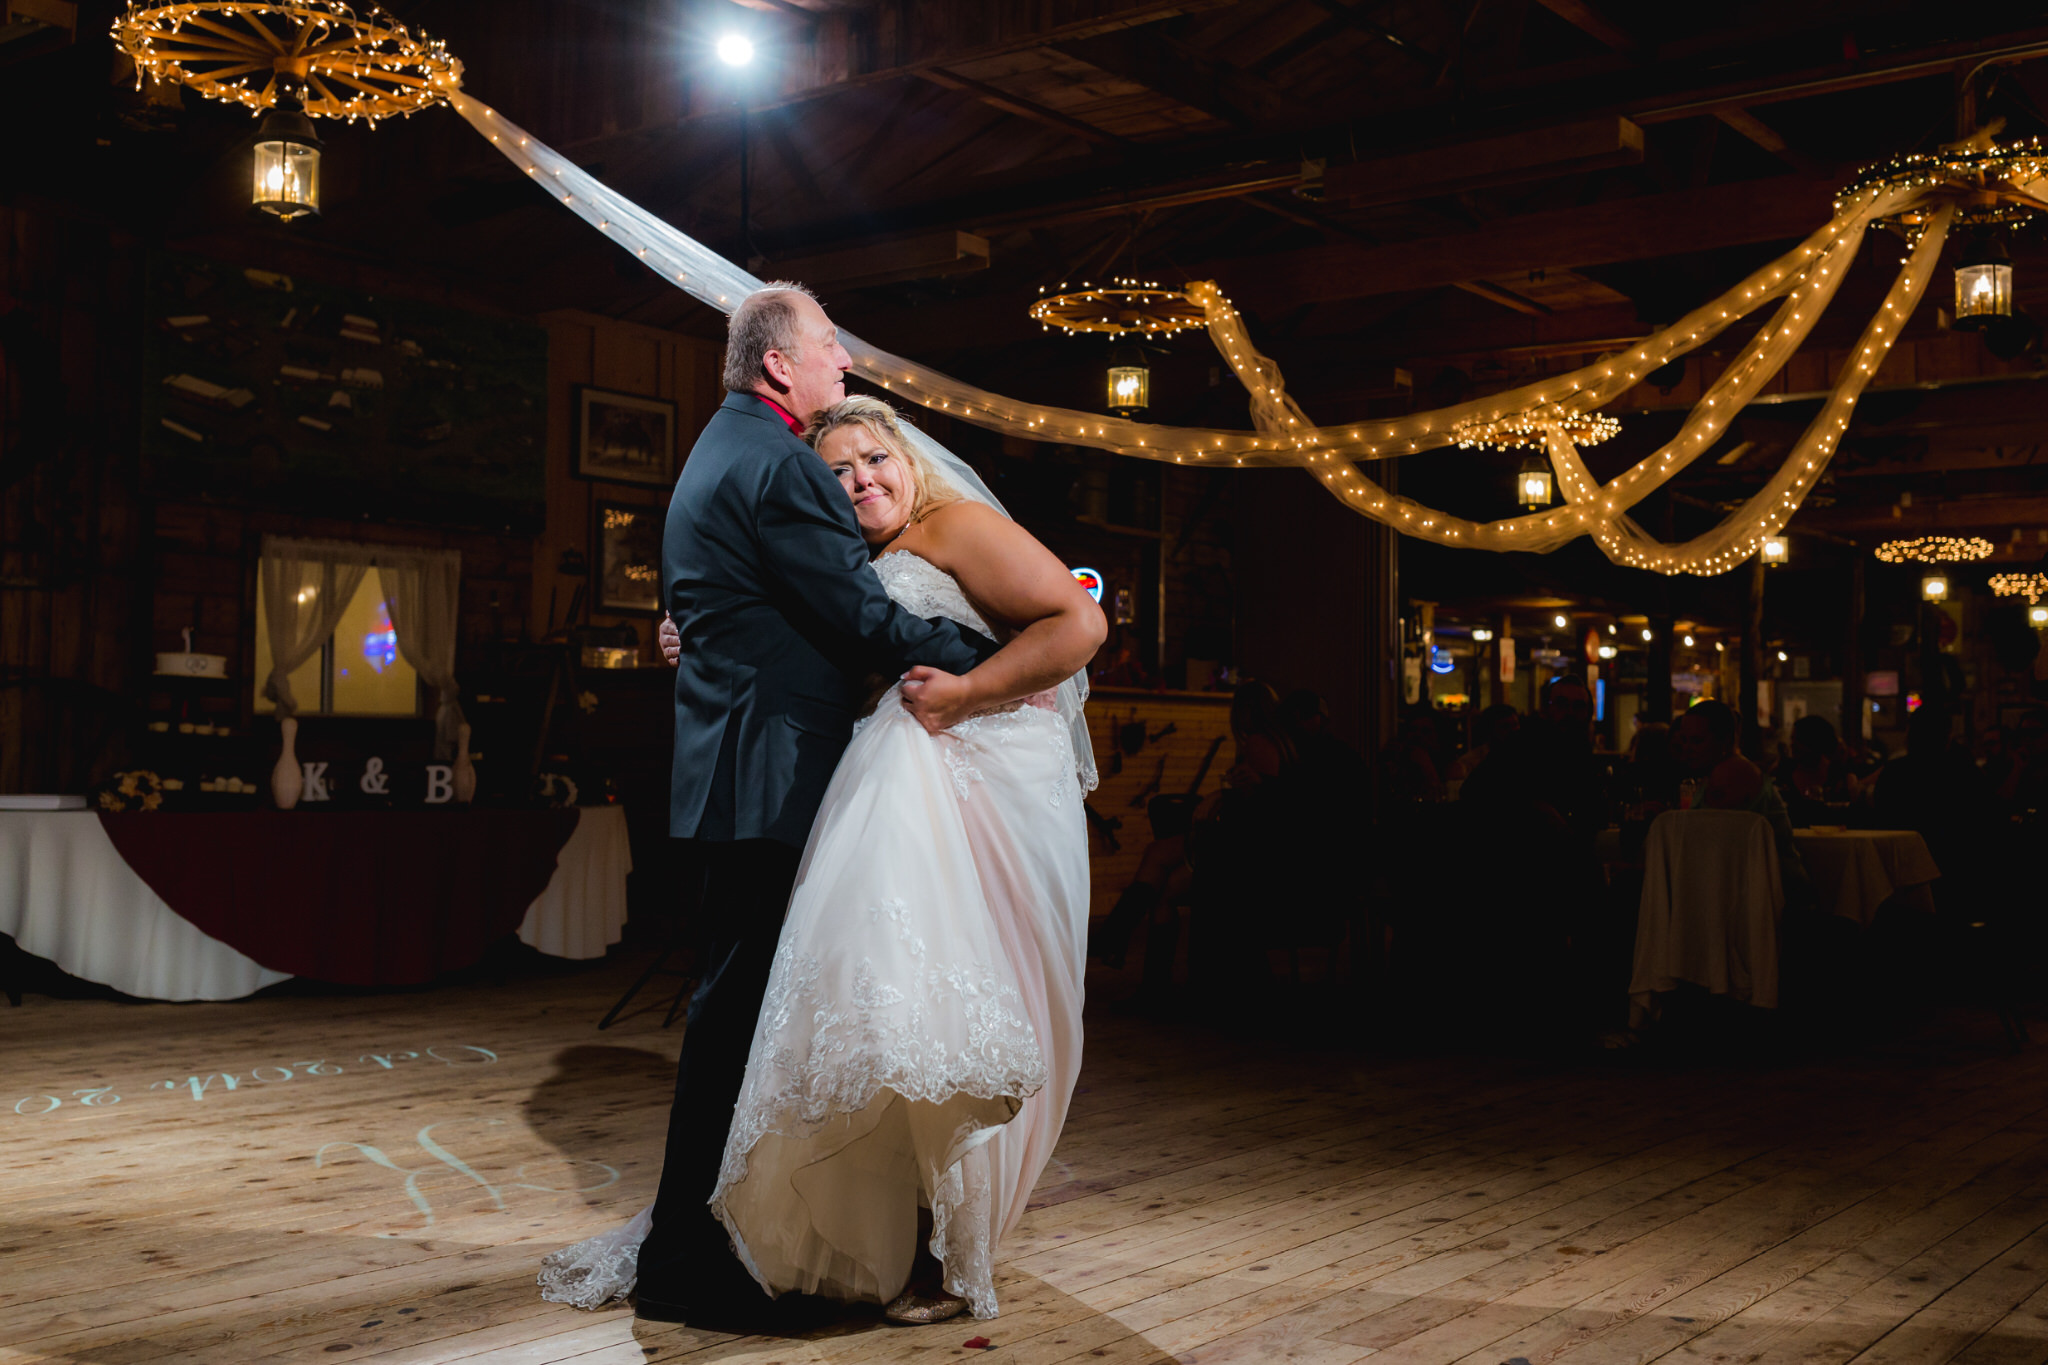 The bride dancing with her father. Briana and Kevin's Terry Bison Ranch Wedding by Wyoming Wedding Photographer Jennifer Garza, Wyoming Wedding, Wyoming Wedding Photographer, Wyoming Engagement Photographer, Wyoming Bride, Couples Goals, Wyoming Wedding, Wedding Photographer, Wyoming Photographer, Wyoming Wedding Photography, Wedding Inspiration, Destination Wedding Photographer, Fall Wedding, Ranch Wedding, Rustic Wedding Inspiration, Wedding Dress Inspo